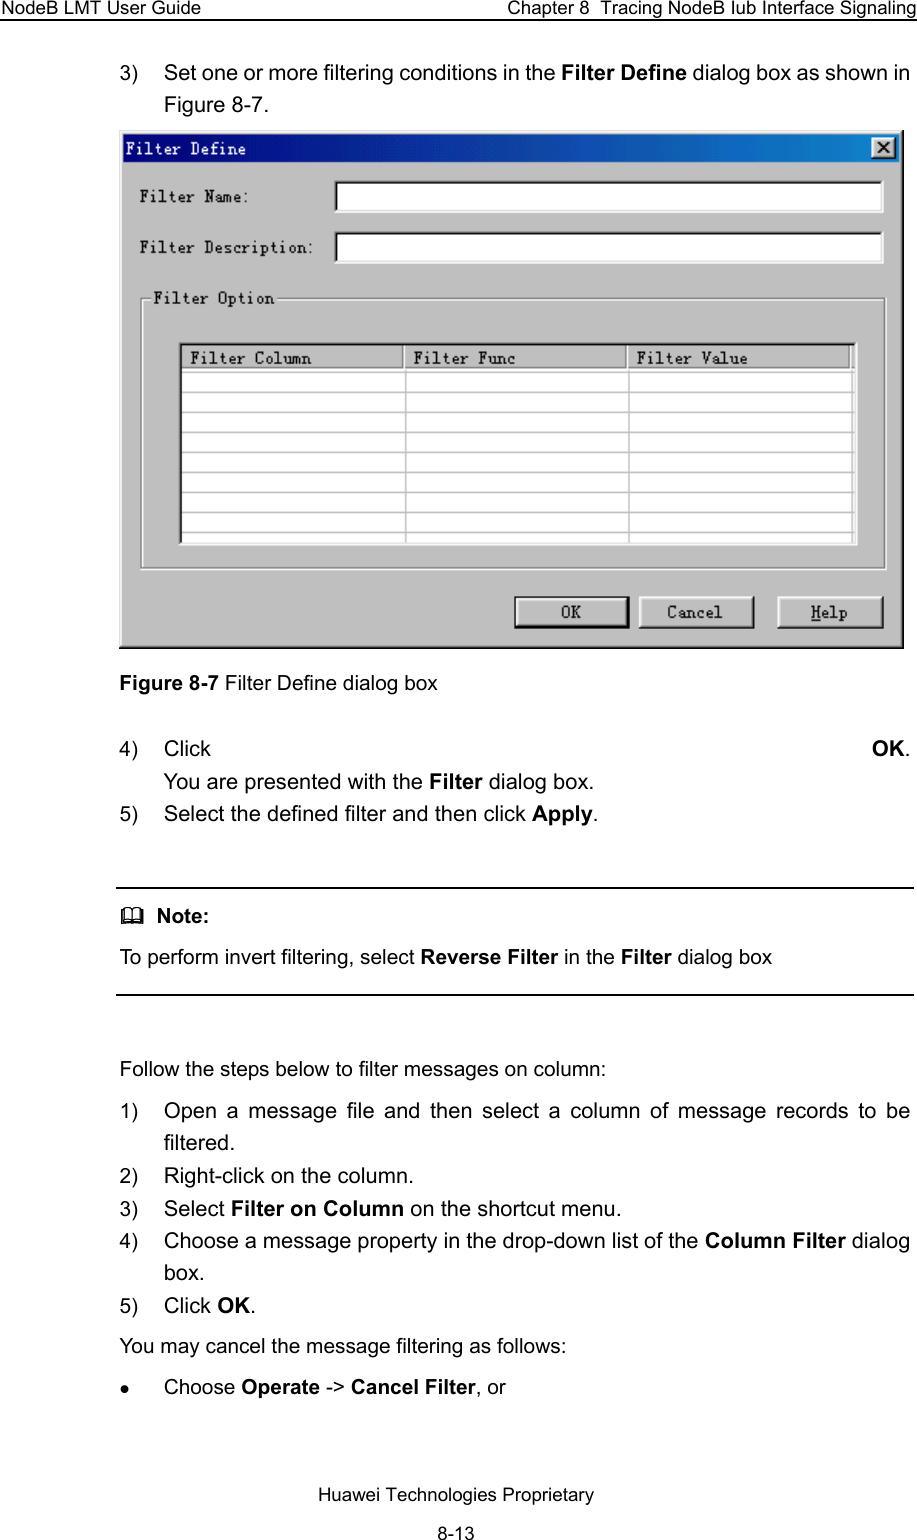 NodeB LMT User Guide  Chapter 8  Tracing NodeB Iub Interface Signaling 3)  Set one or more filtering conditions in the Filter Define dialog box as shown in Figure 8-7.  Figure 8-7 Filter Define dialog box 4)  Click  OK.  You are presented with the Filter dialog box. 5)  Select the defined filter and then click Apply.    Note: To perform invert filtering, select Reverse Filter in the Filter dialog box   Follow the steps below to filter messages on column: 1)  Open a message file and then select a column of message records to be filtered. 2)  Right-click on the column.  3)  Select Filter on Column on the shortcut menu. 4)  Choose a message property in the drop-down list of the Column Filter dialog box. 5)  Click OK.  You may cancel the message filtering as follows: z Choose Operate -&gt; Cancel Filter, or   Huawei Technologies Proprietary 8-13 